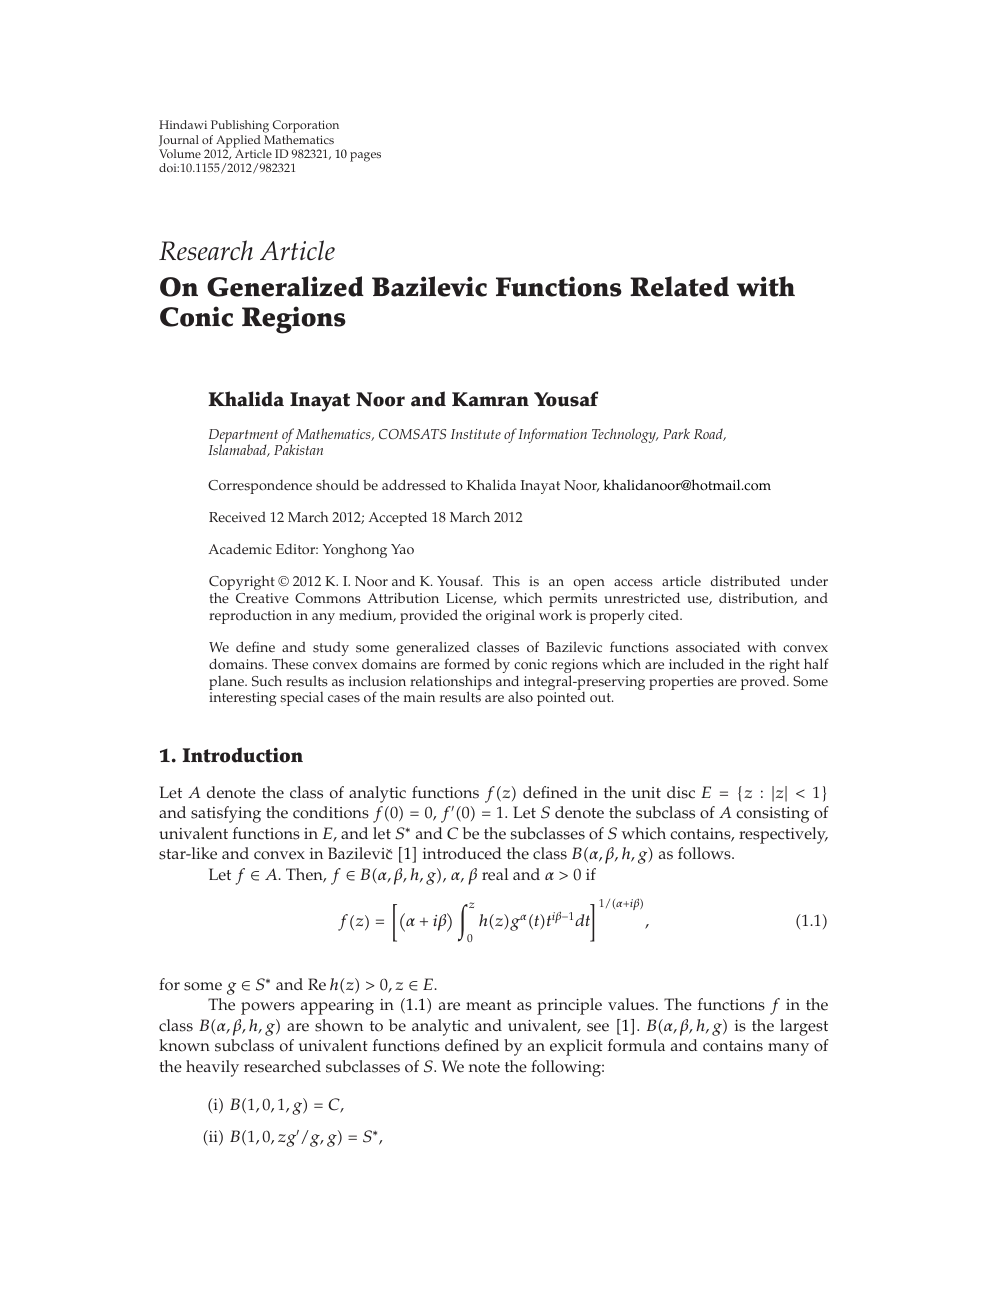 On Generalized Bazilevic Functions Related With Conic Regions Topic Of Research Paper In Mathematics Download Scholarly Article Pdf And Read For Free On Cyberleninka Open Science Hub